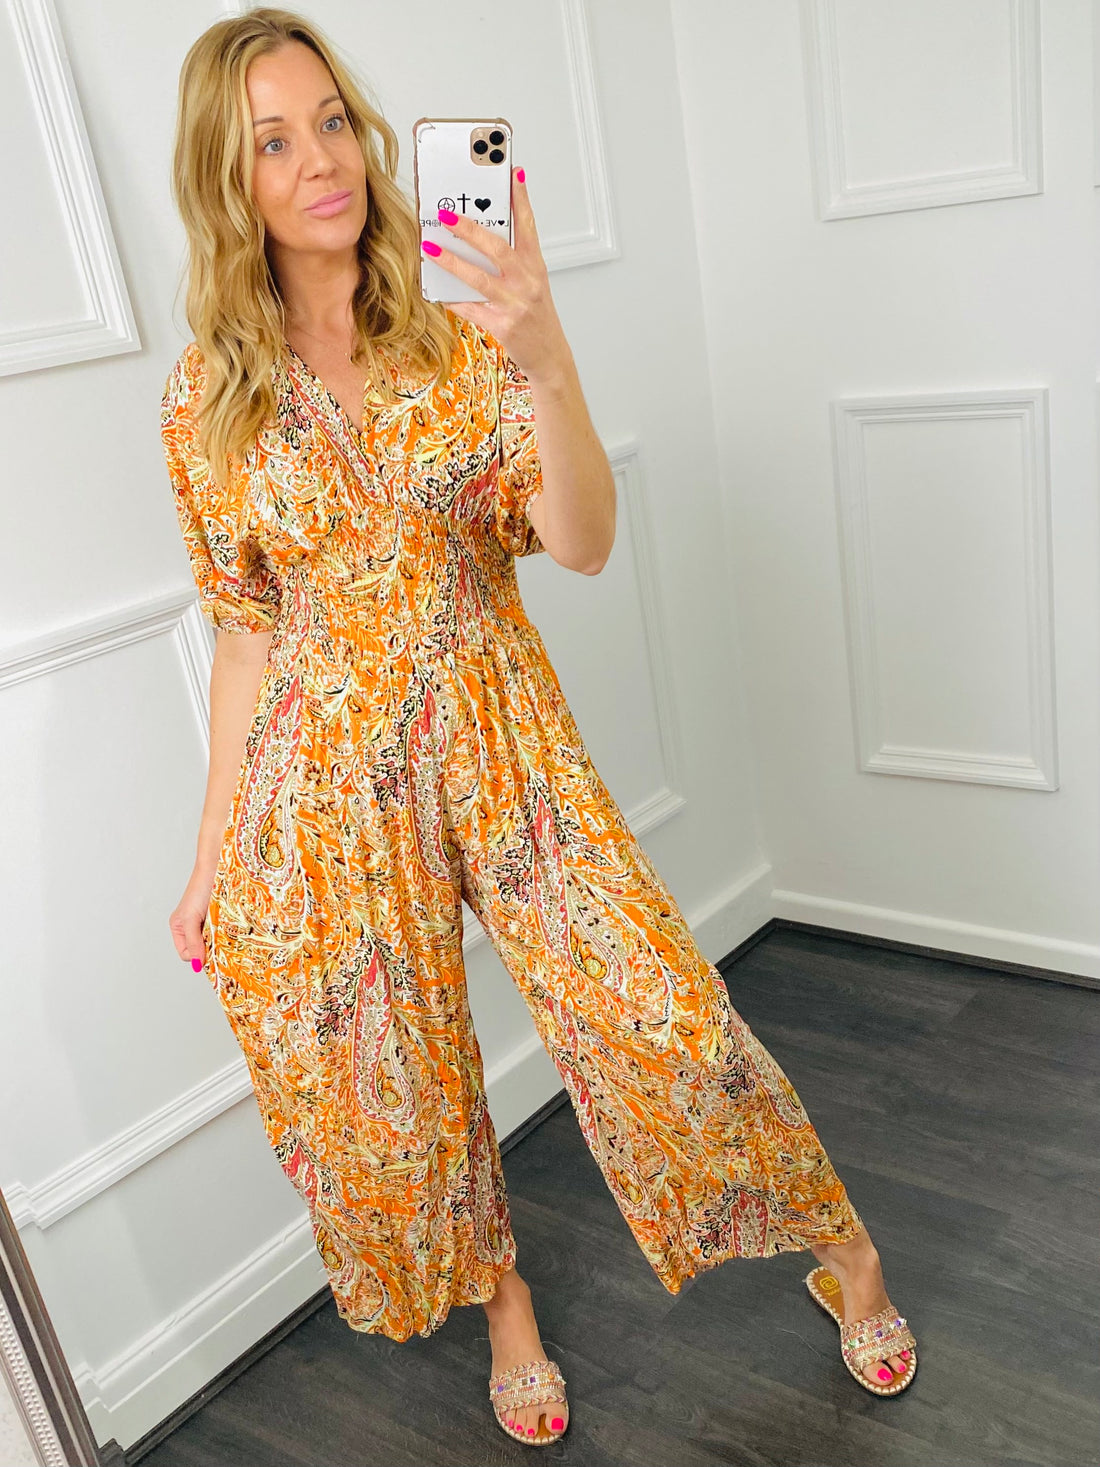 How To Style Your Patterned Jumpsuit